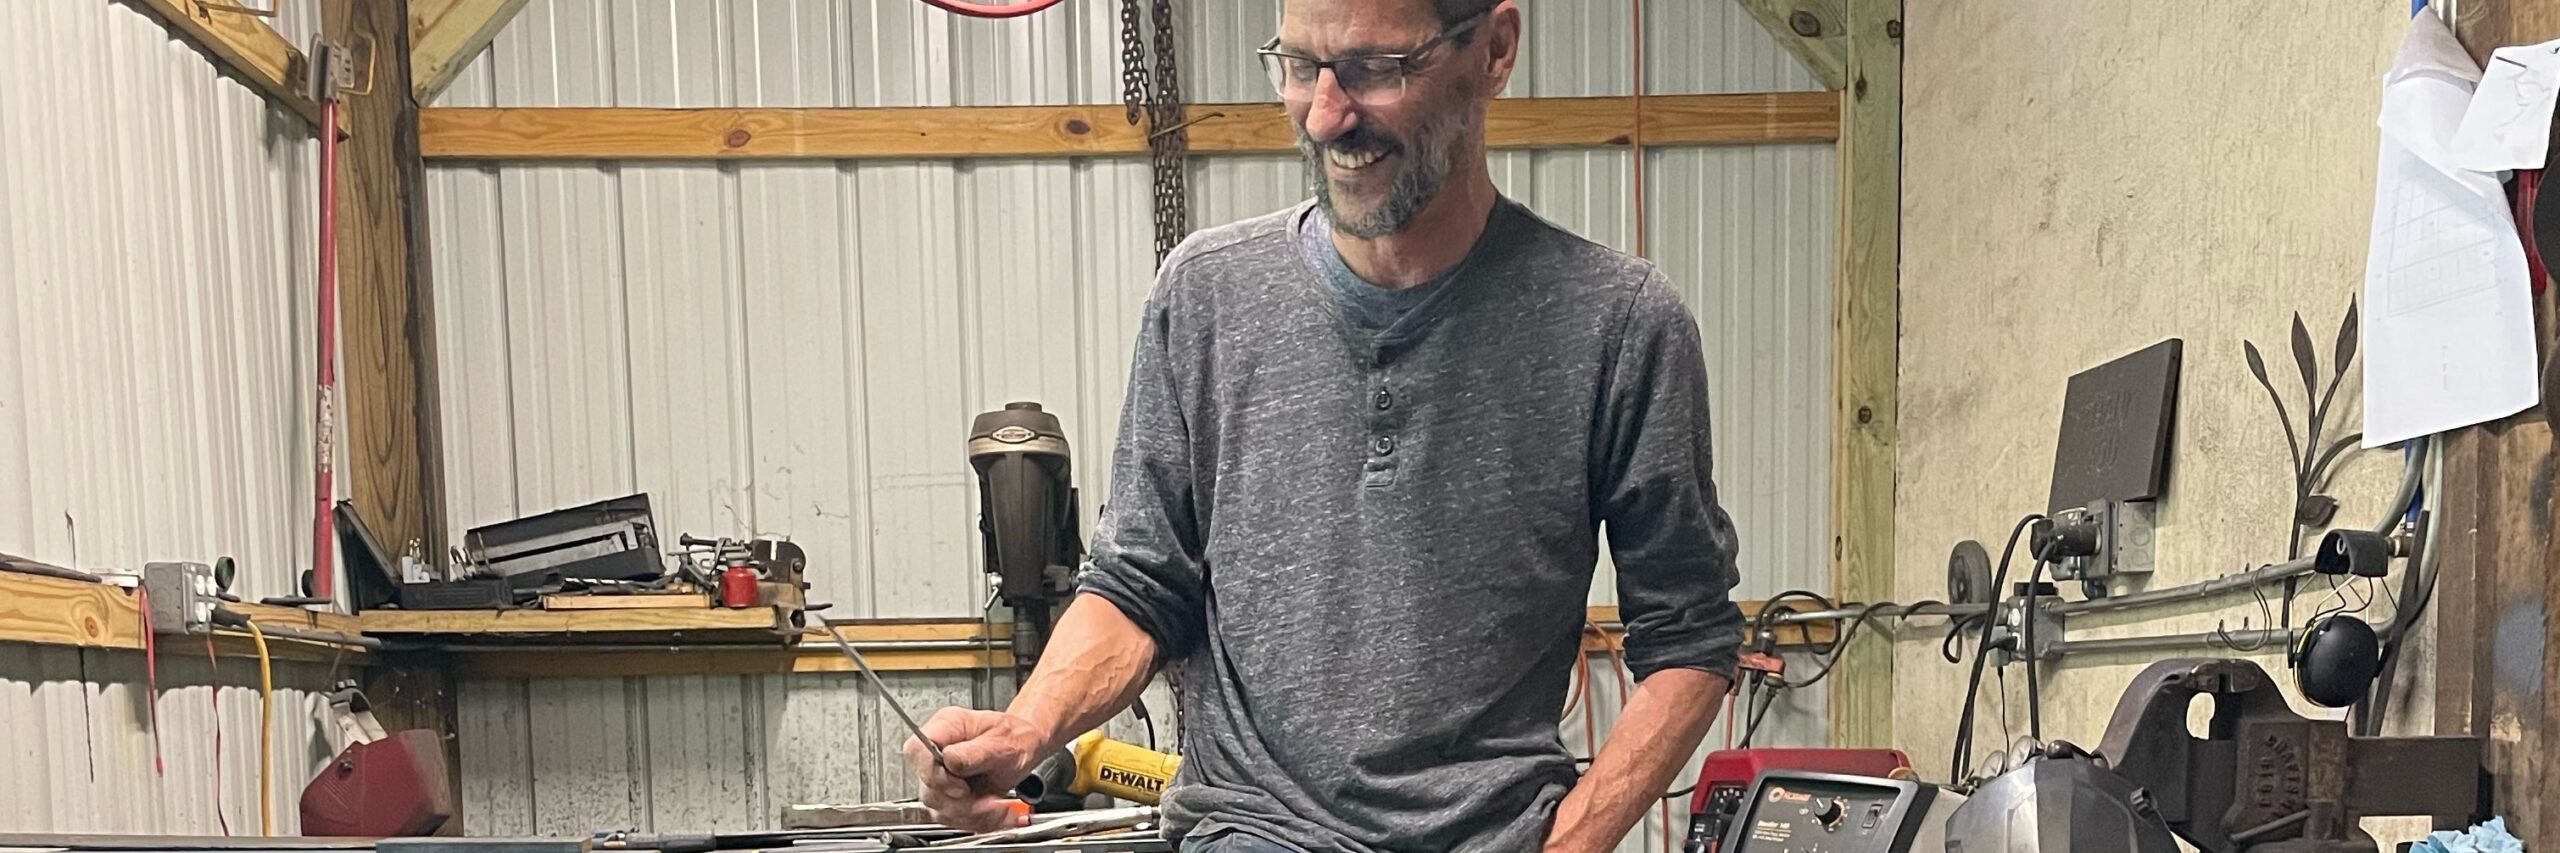 Smiling white man in gray henley shirt looking down at his drafting in his metal and woodworking shop.